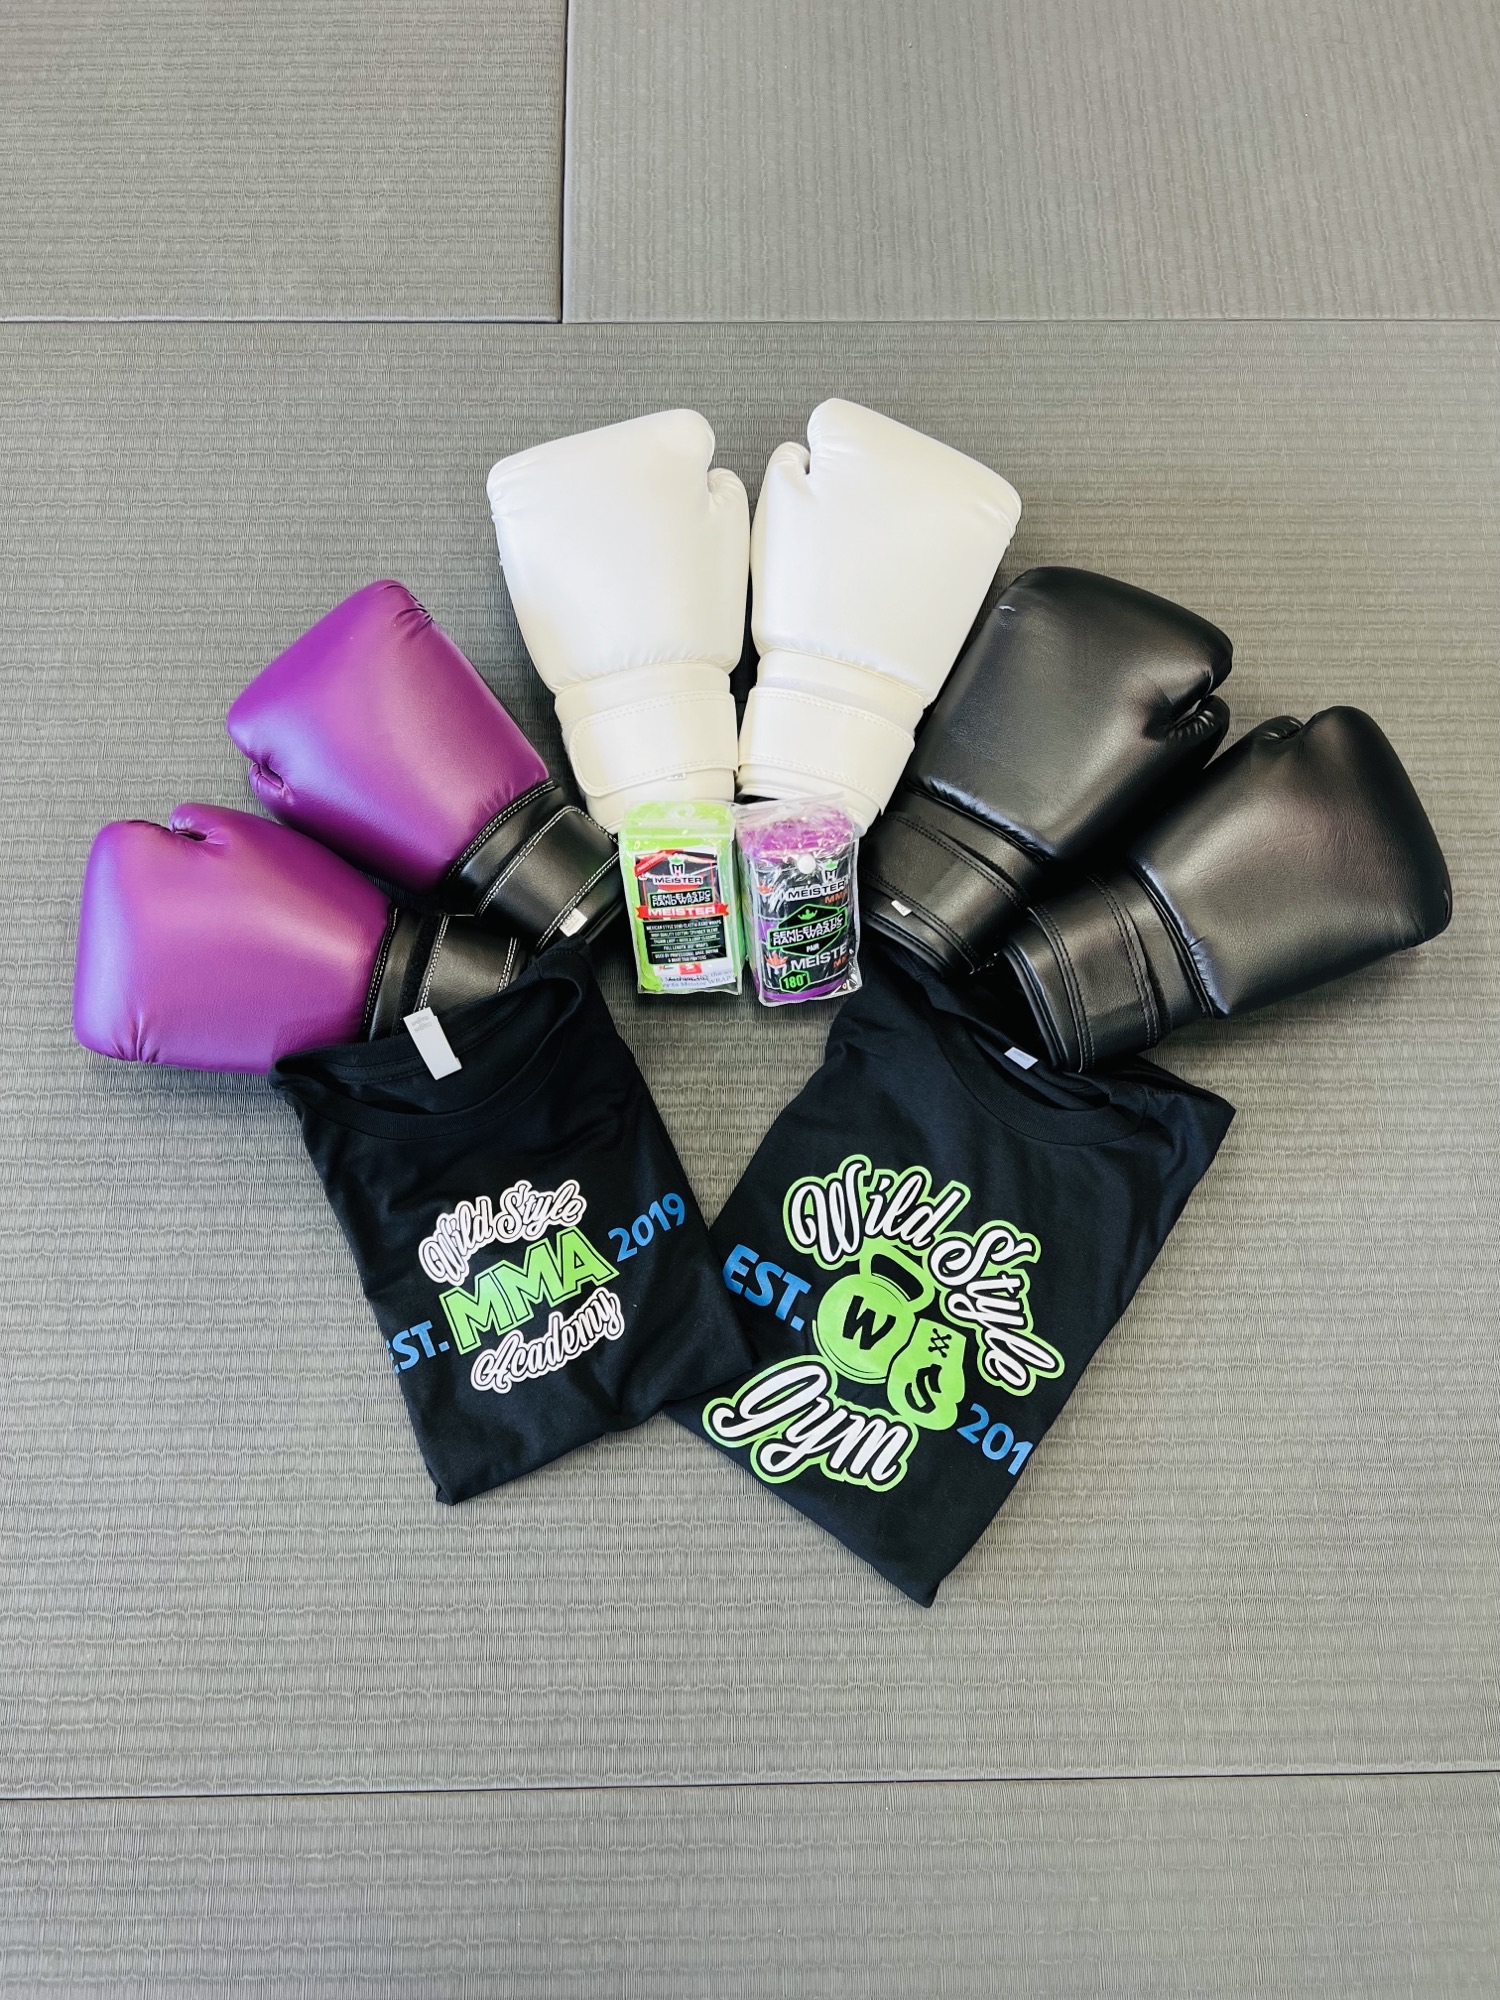 It Might Be Time To Schedule Your Freestyle Kickboxing Sessions